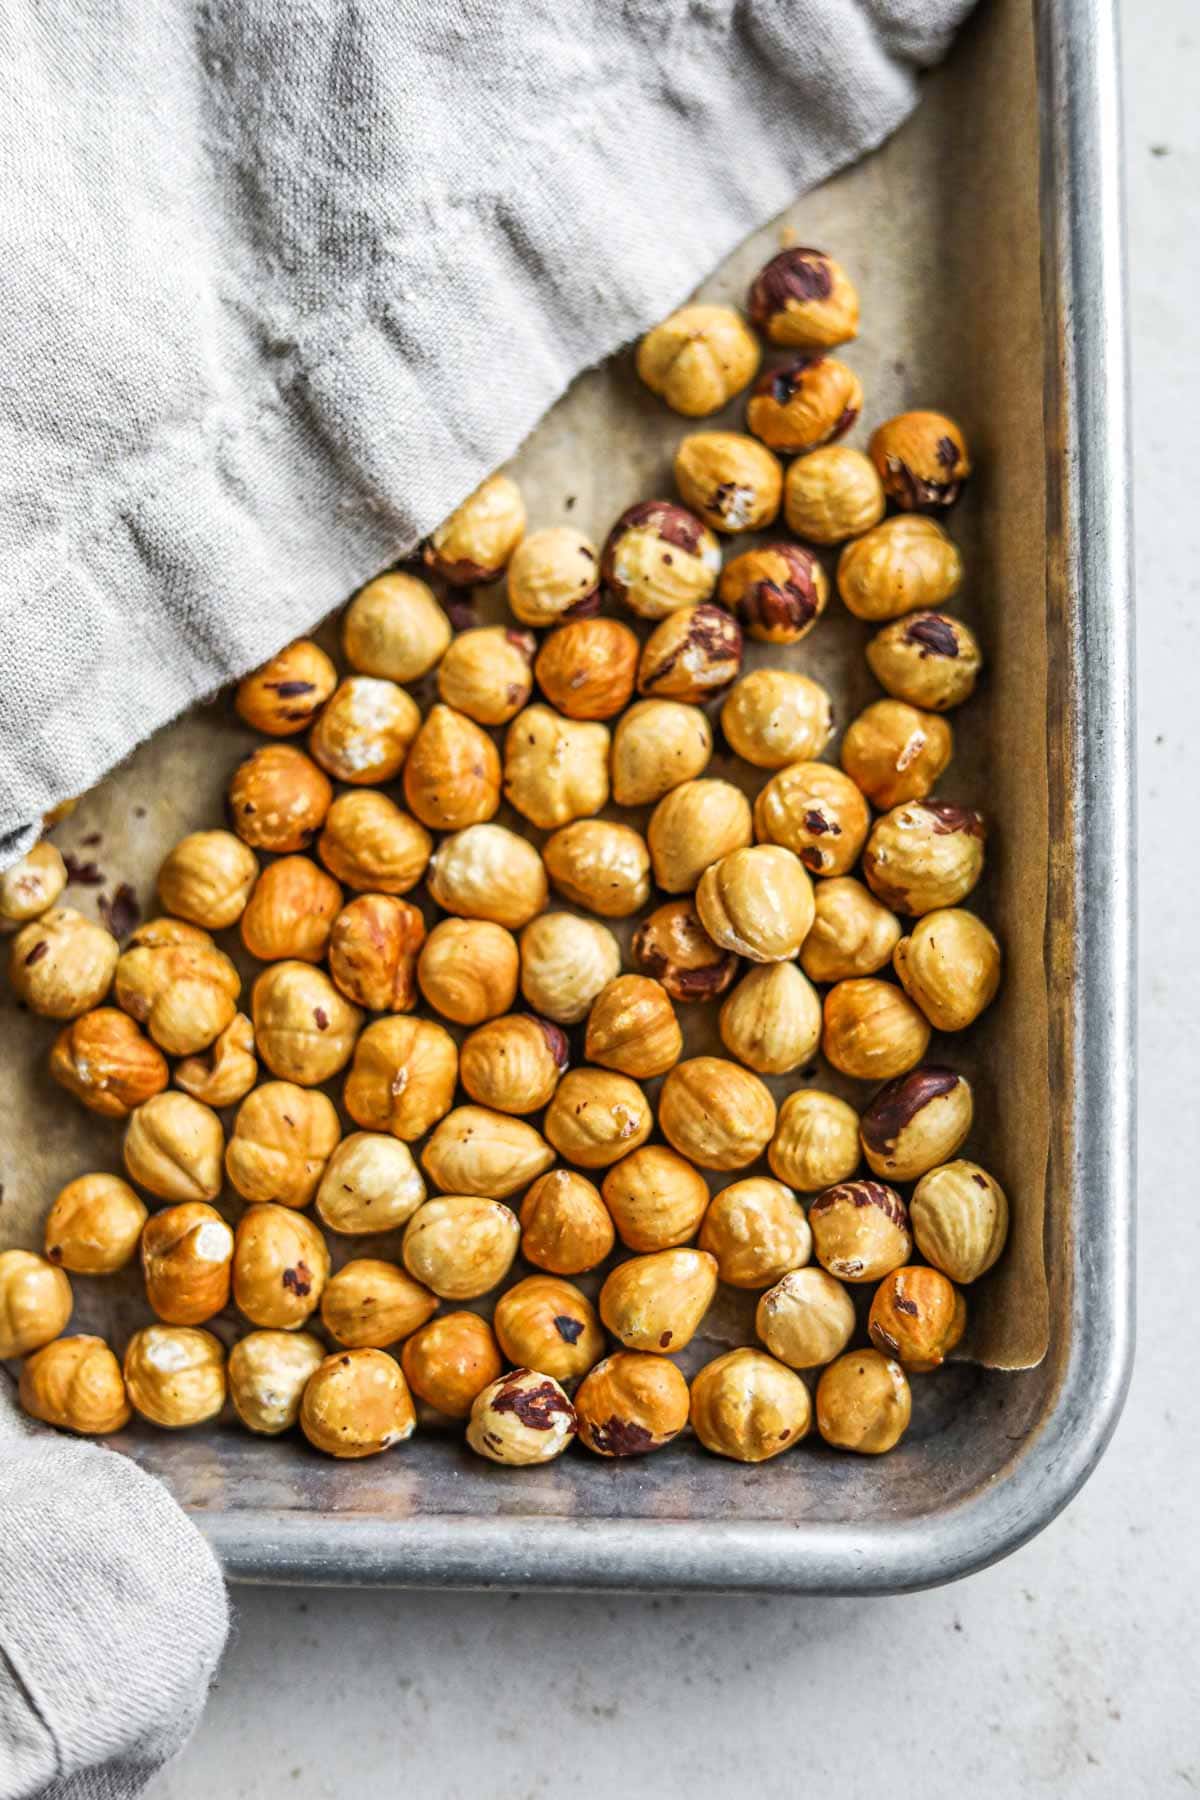 Flatlay view of roasted hazelnuts on a sheet pan.